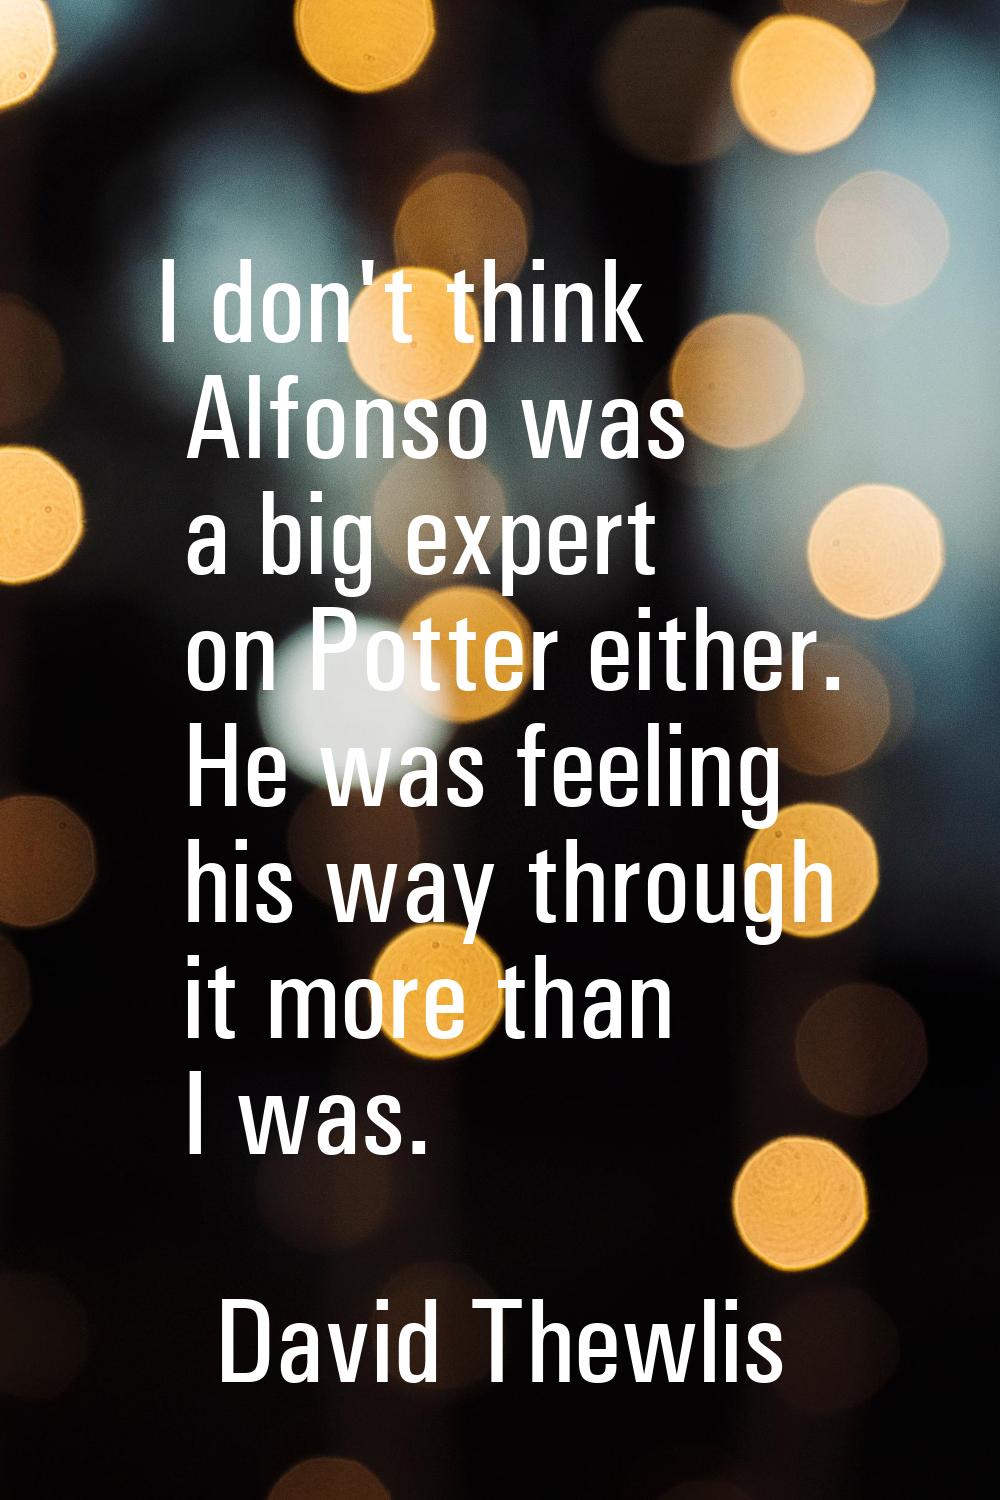 I don't think Alfonso was a big expert on Potter either. He was feeling his way through it more tha